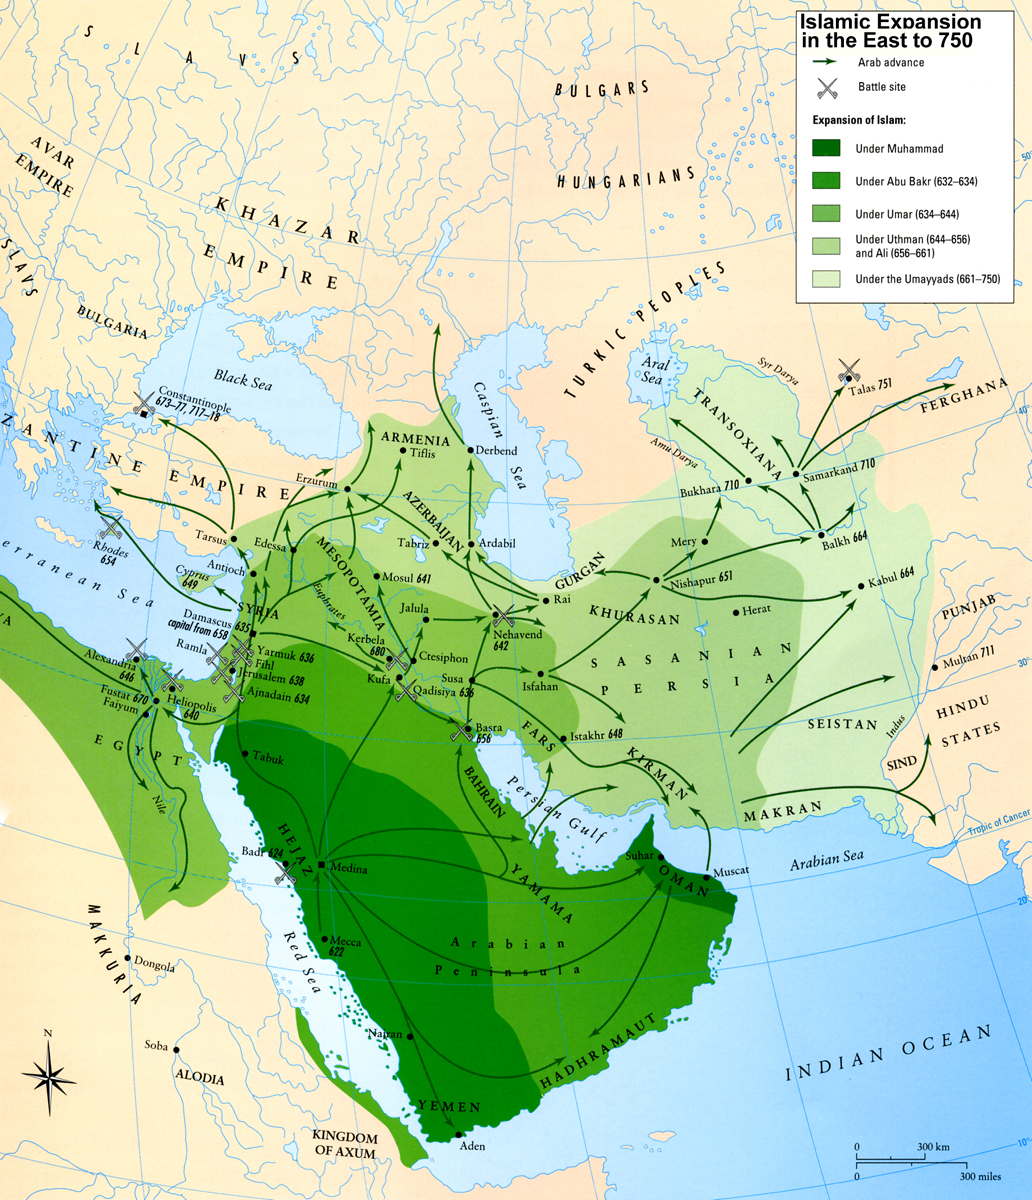 Map - Islamic Expansion to 750